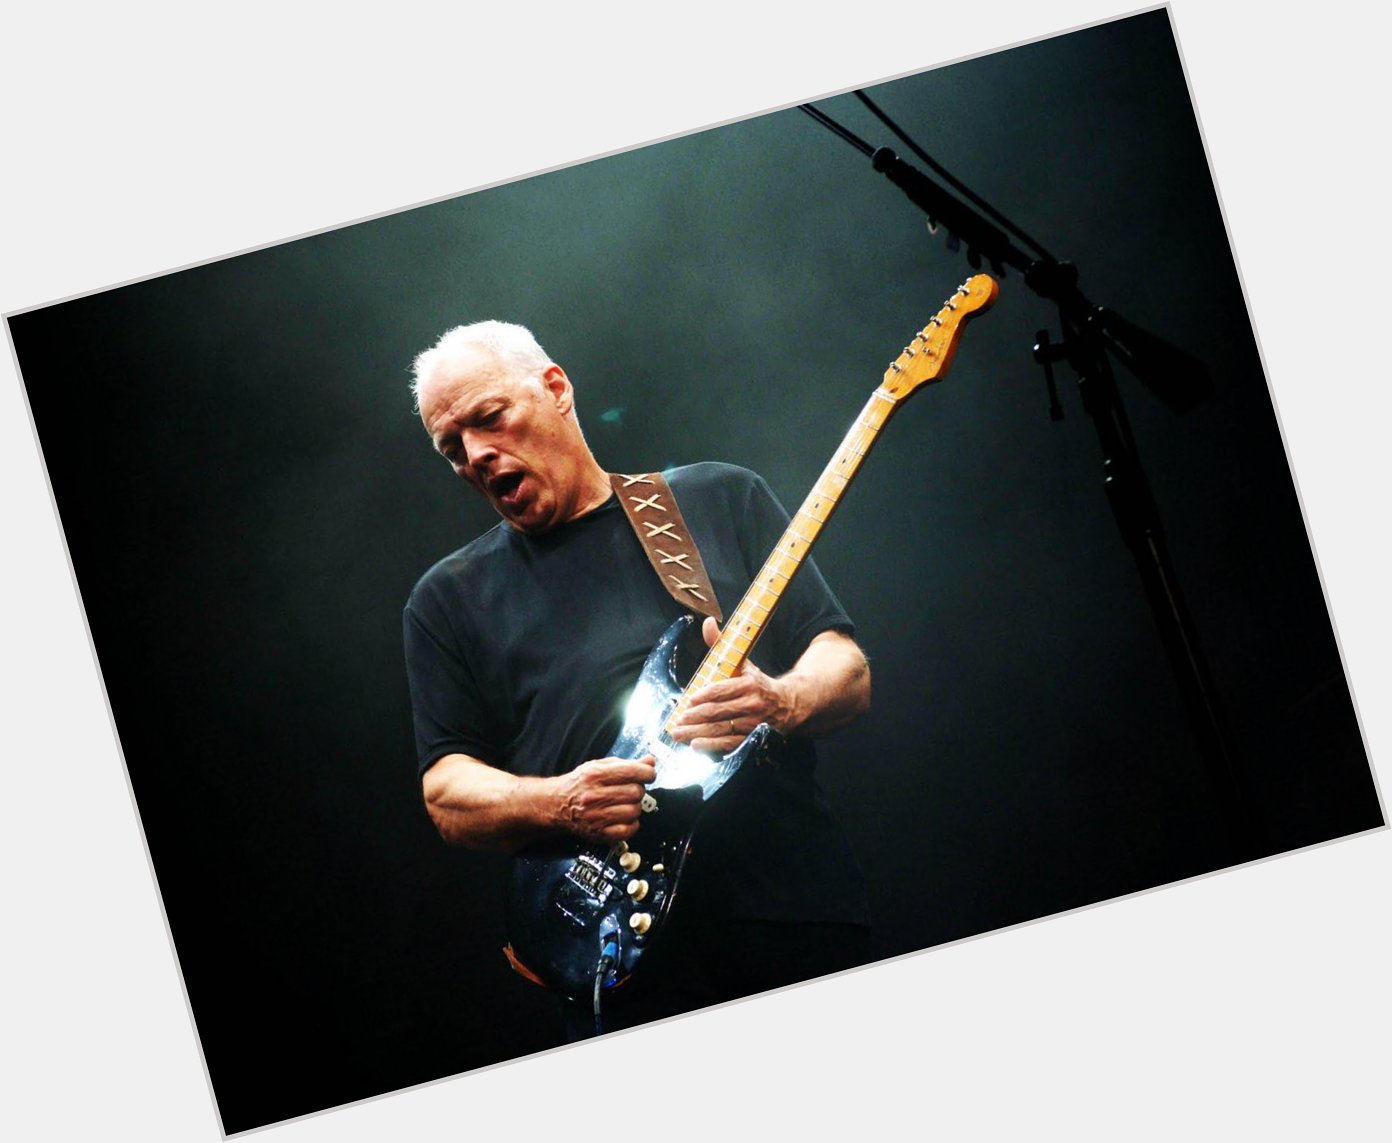 He\ll never burn up a fret board but his guitar sound and playing will live on forever. Happy Birthday David Gilmour! 